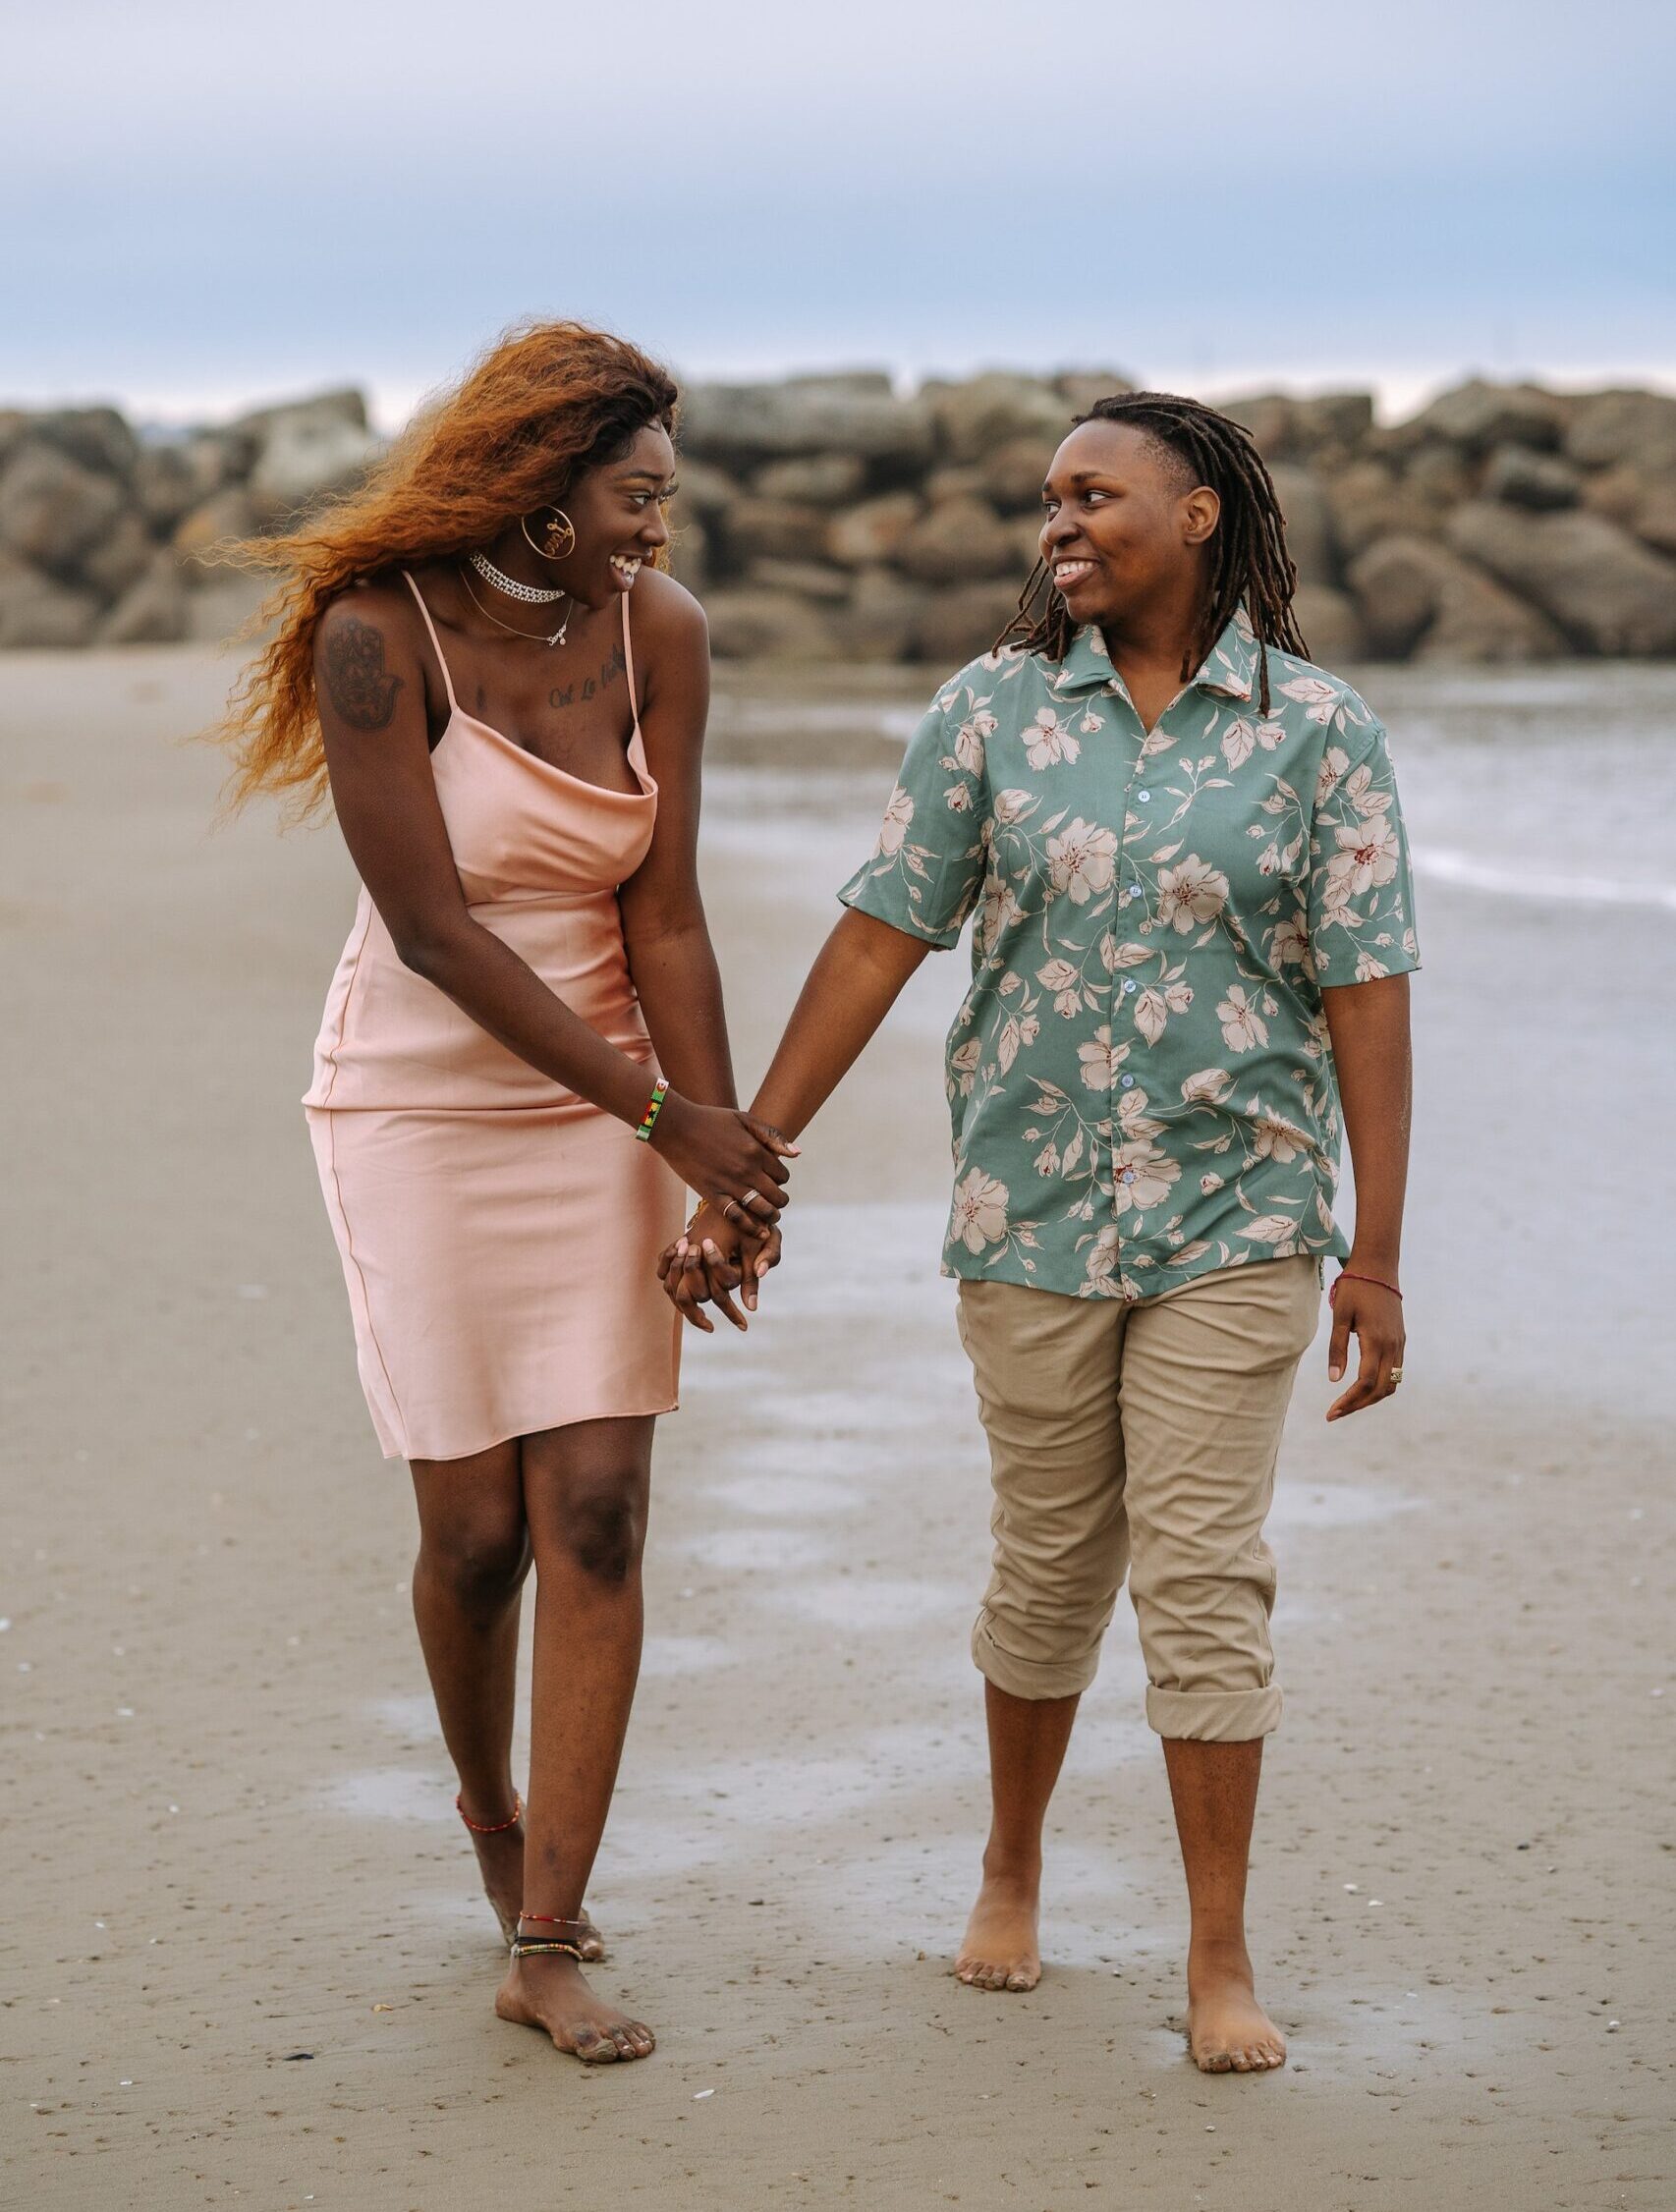 Sex therapy can support queer couples on an identity journey. 